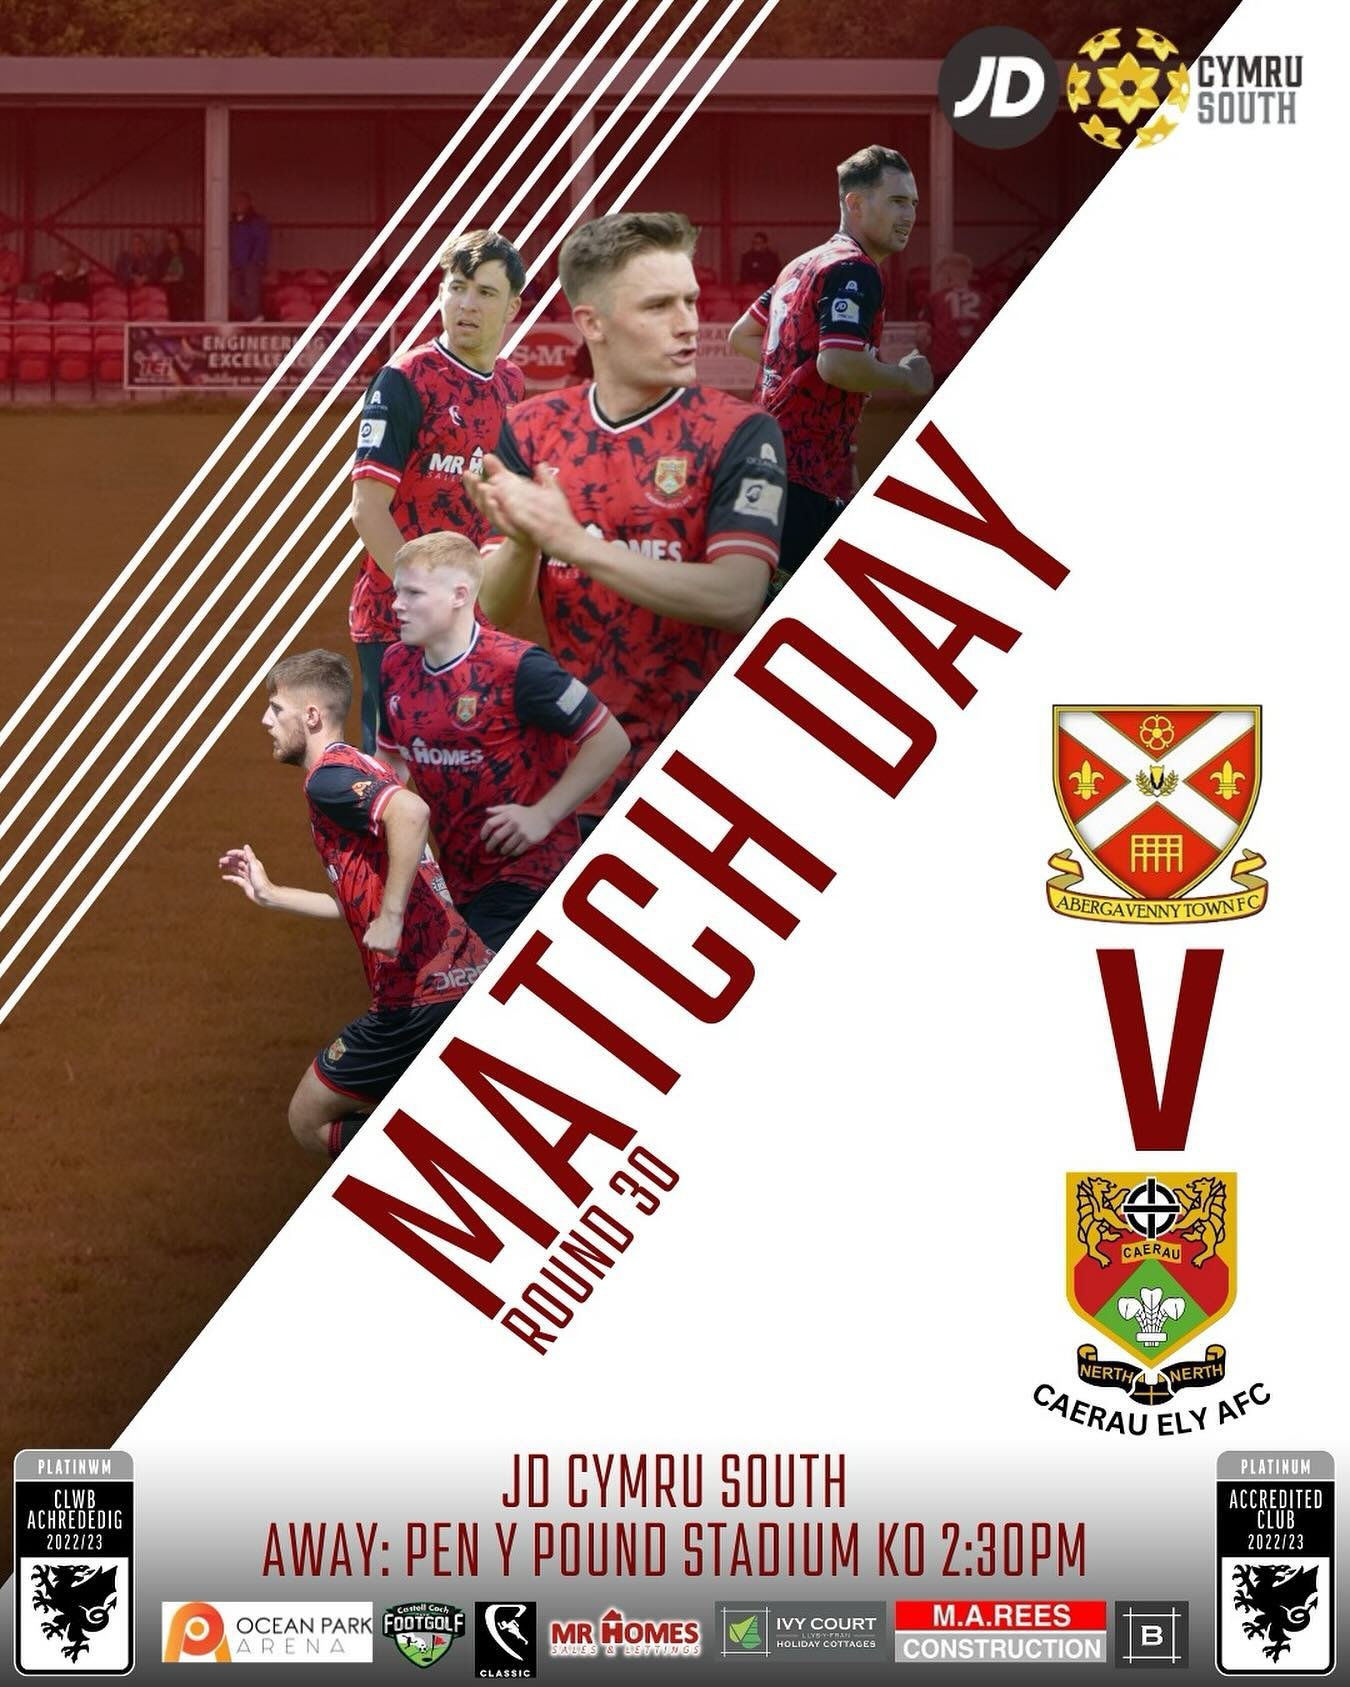 Our last game of the season today as we face @abergavennytfc . The ☀️is out and hoping to finish our first season back in the @cymruleagues with a good performance to cap off a decent season. @yclwbpeldroed  #youngguns